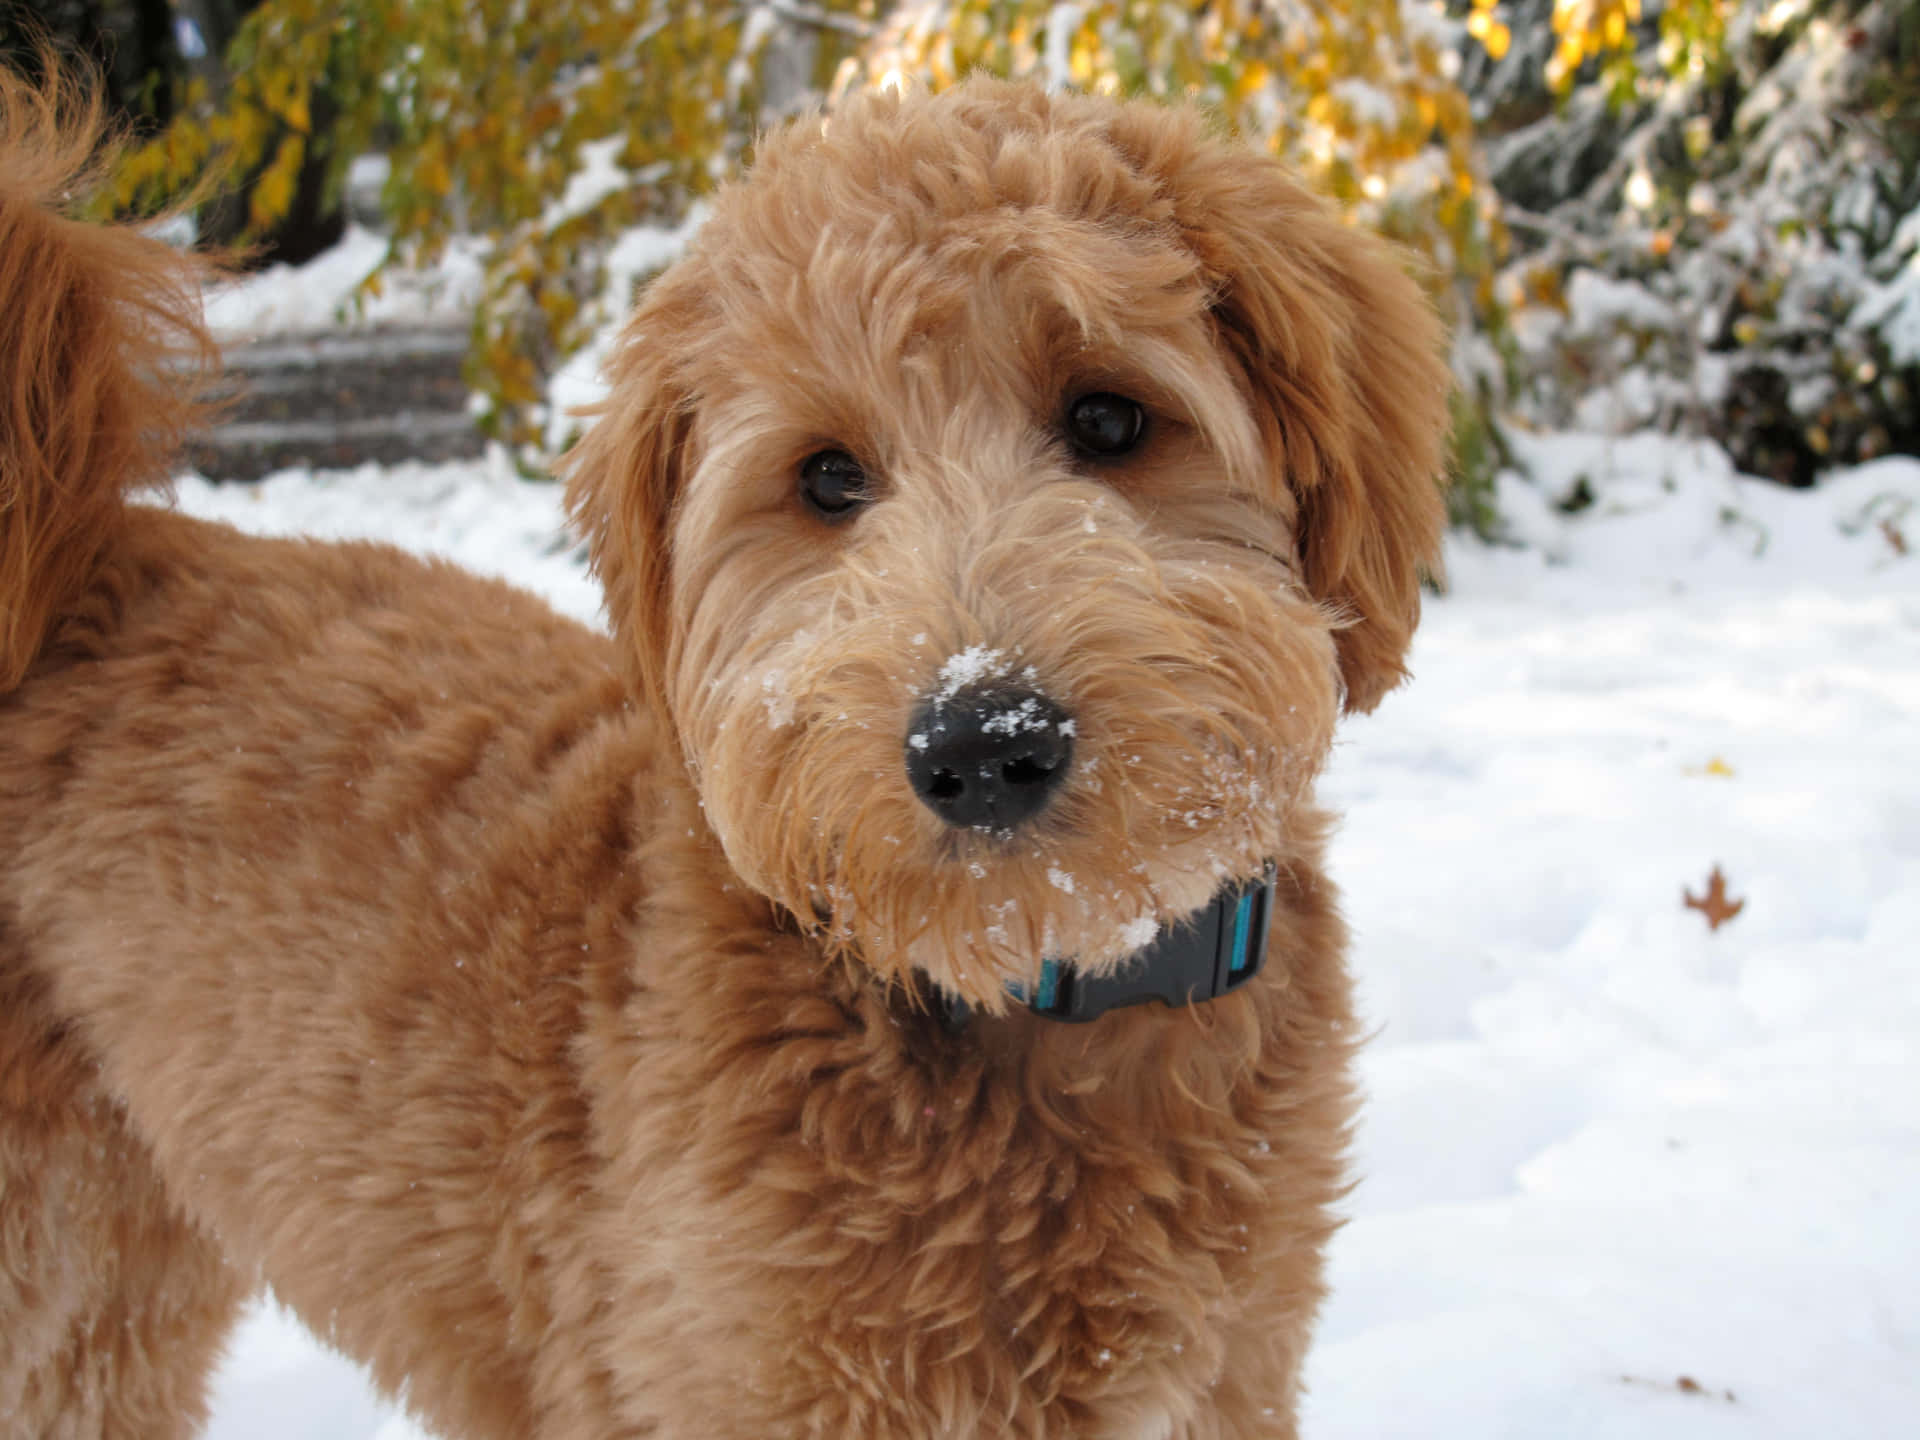 Playful Goldendoodle puppy